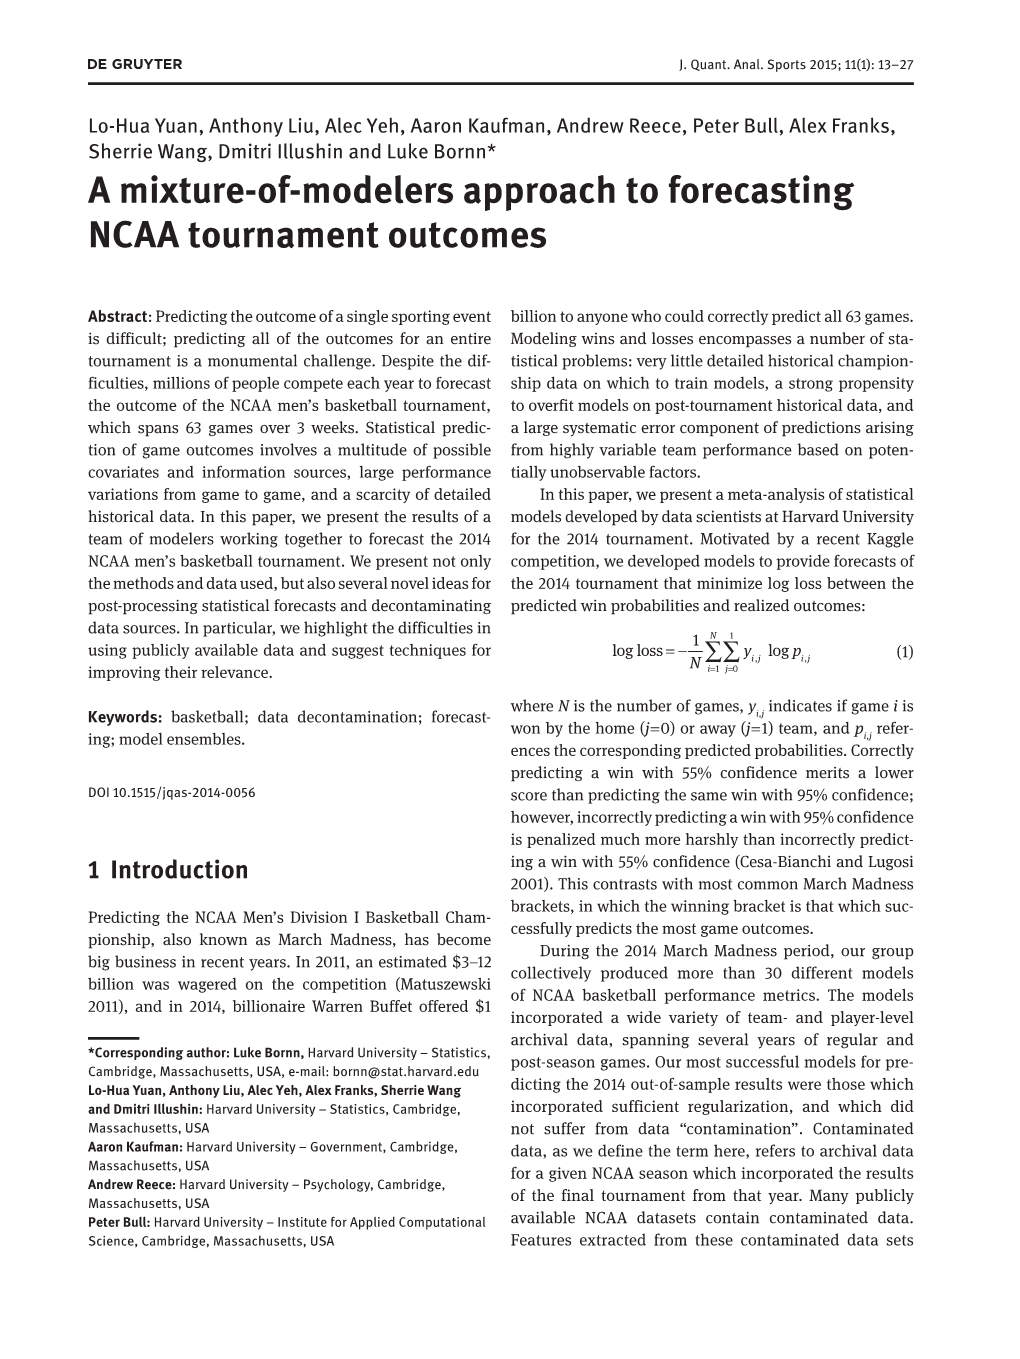 A Mixture-Of-Modelers Approach to Forecasting NCAA Tournament Outcomes